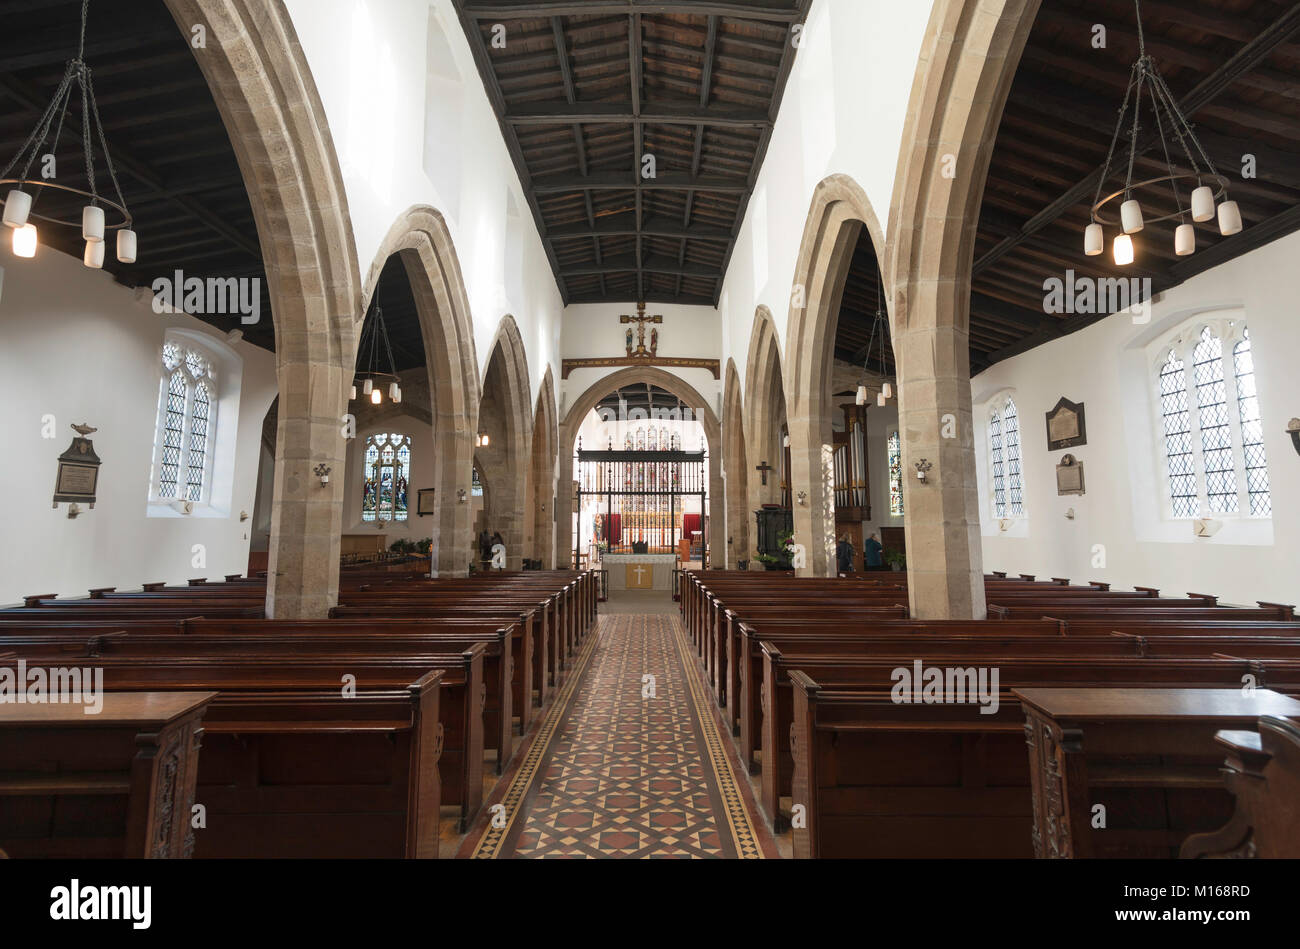 Interior view of the Church of St John the Baptist, Newcastle upon Tyne, England, Stock Photo